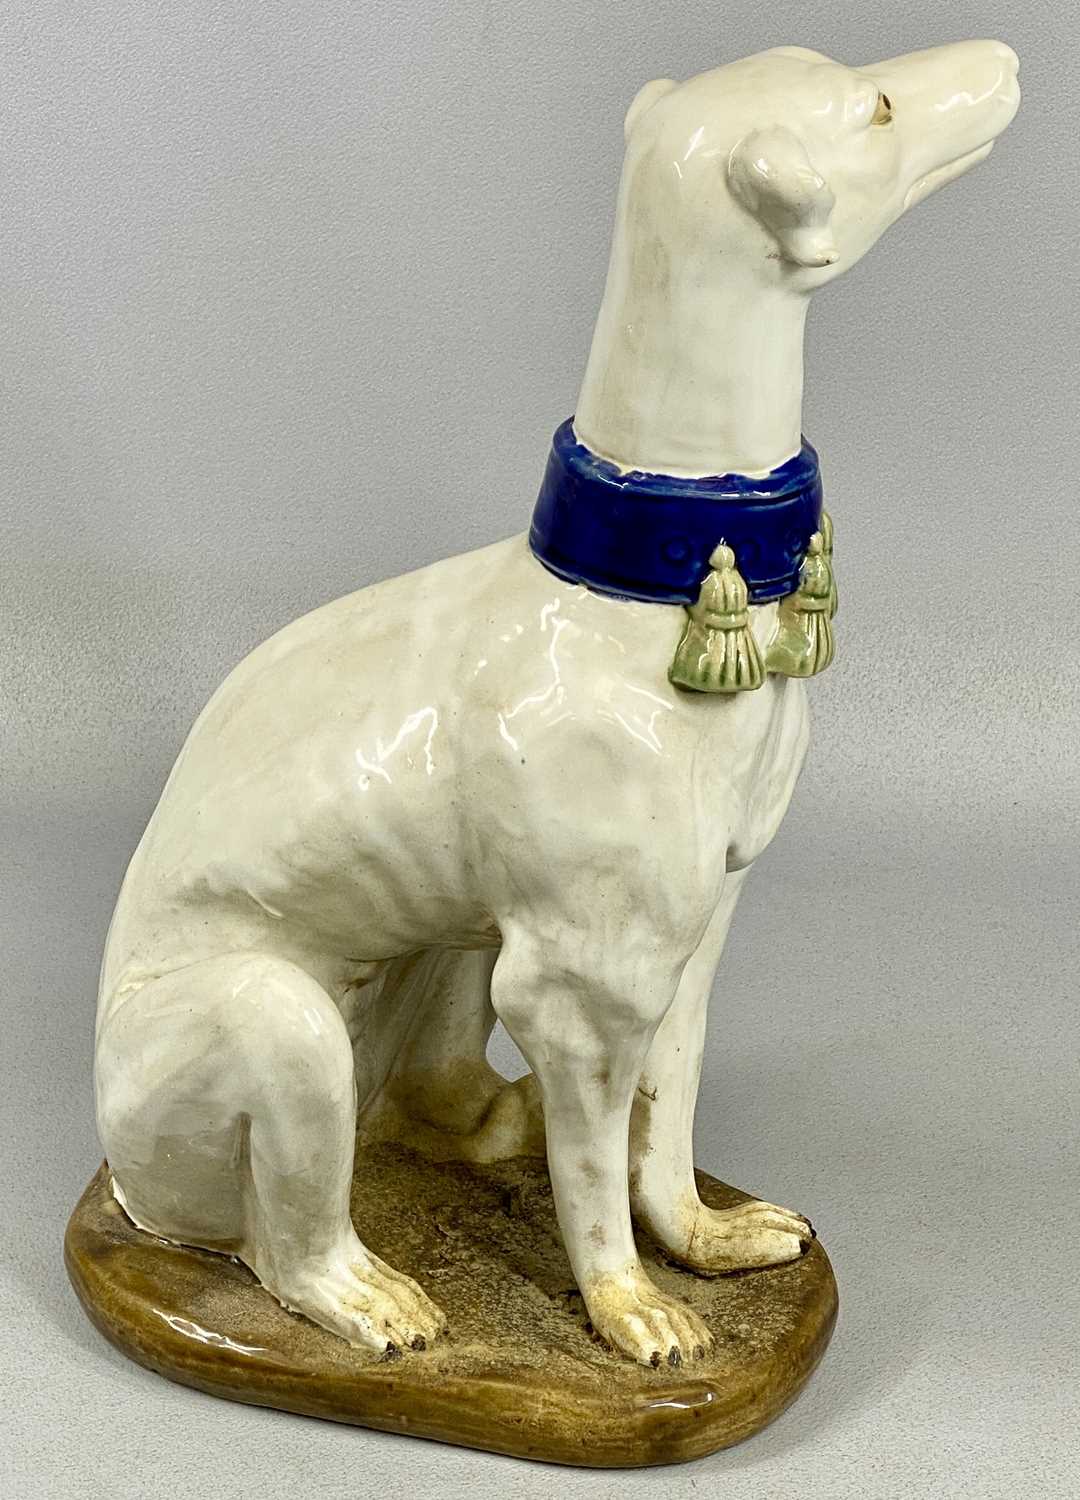 PAIR OF ITALIAN MAJOLICA GREYHOUNDS 20th century, seated and in cream glaze with tassled blue - Image 4 of 5